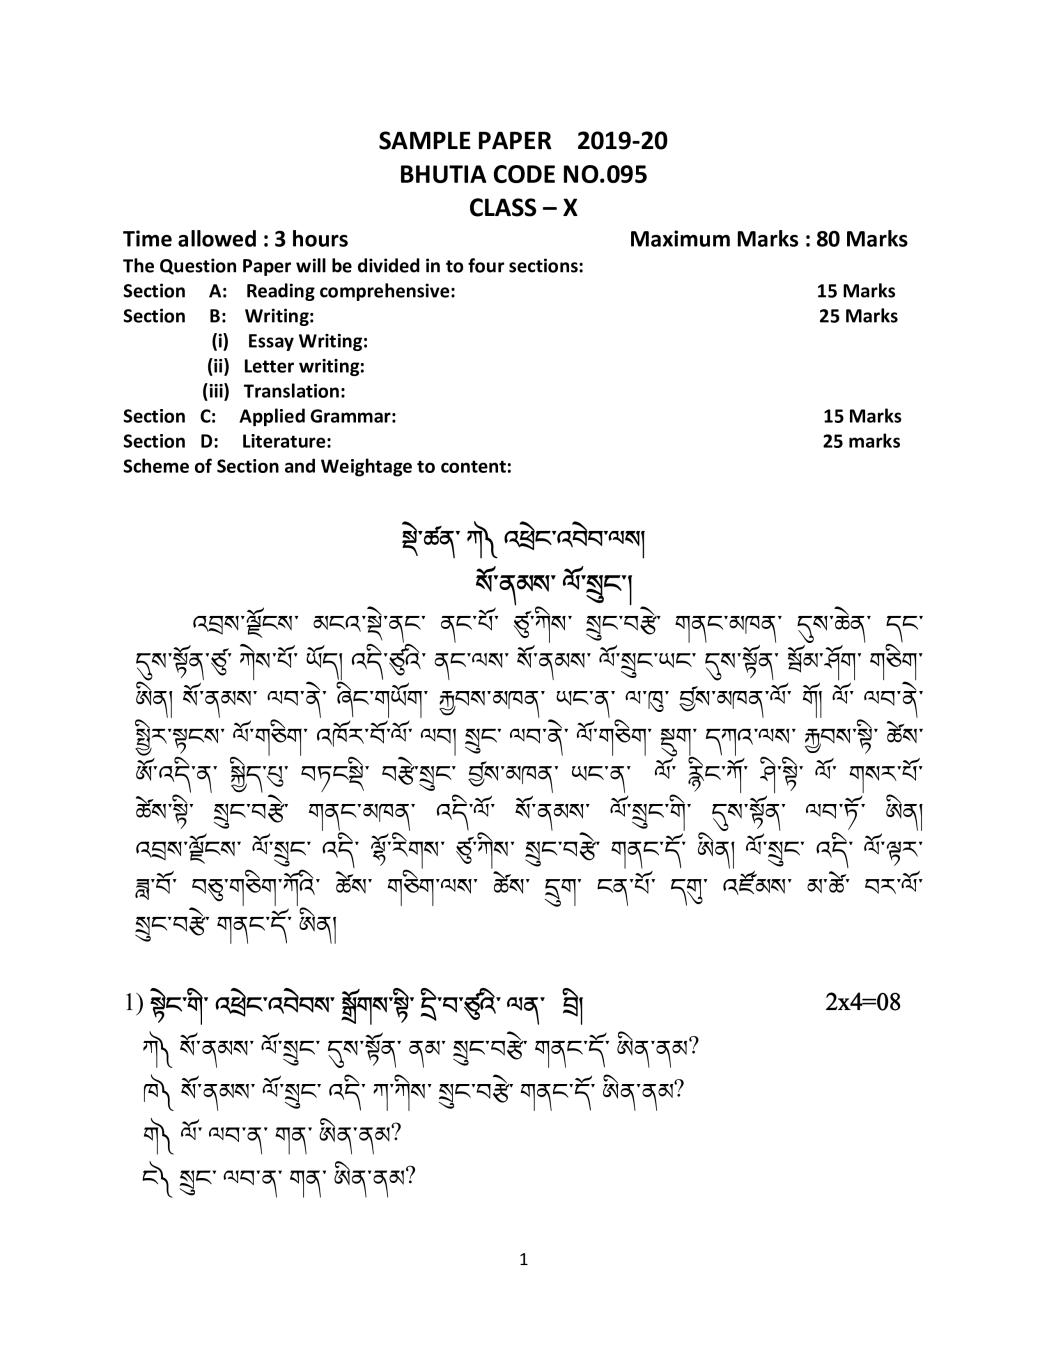 CBSE Class 10 Sample Paper 2020 for Bhutia - Page 1